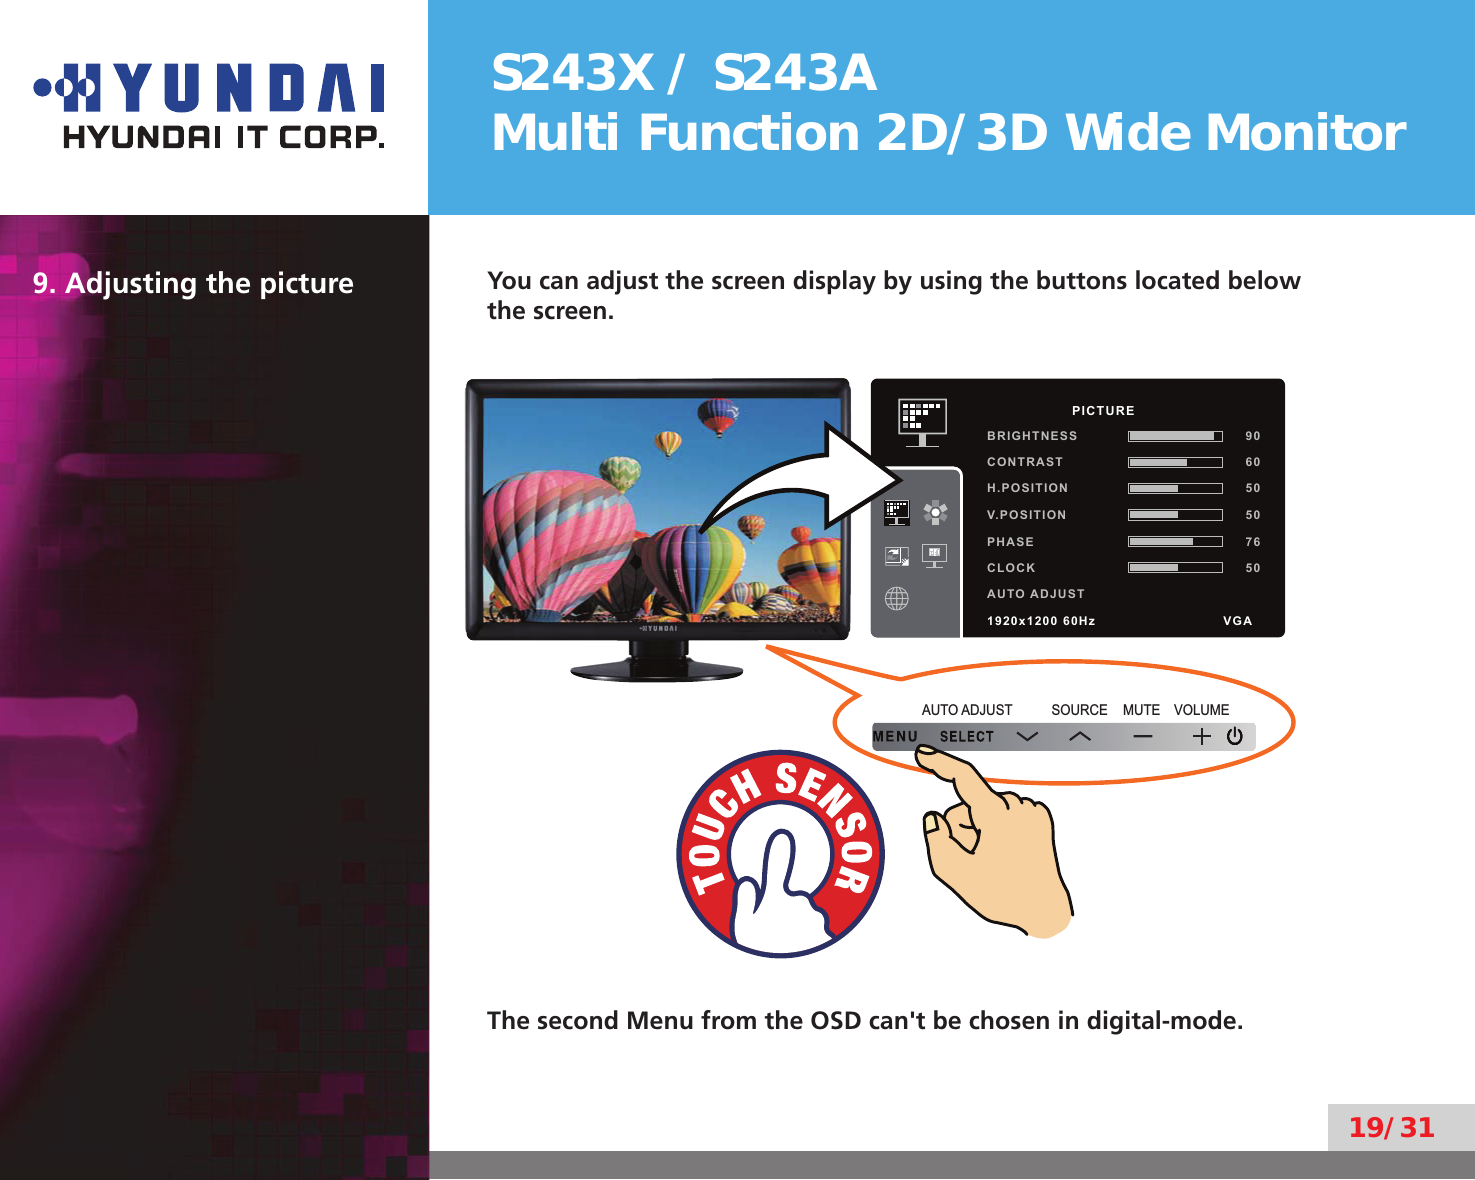 S243X / S243AMulti Function 2D/3D Wide Monitor19/319. Adjusting the picture You can adjust the screen display by using the buttons located below the screen.MUTE VOLUMESOURCEAUTO ADJUSTThe second Menu from the OSD can&apos;t be chosen in digital-mode.          PICTUREBRIGHTNESS 90CONTRAST 60H.POSITION 50V.POSITION 50PHASE 76CLOCK 50AUTO ADJUST1920x1200 60Hz               VGA